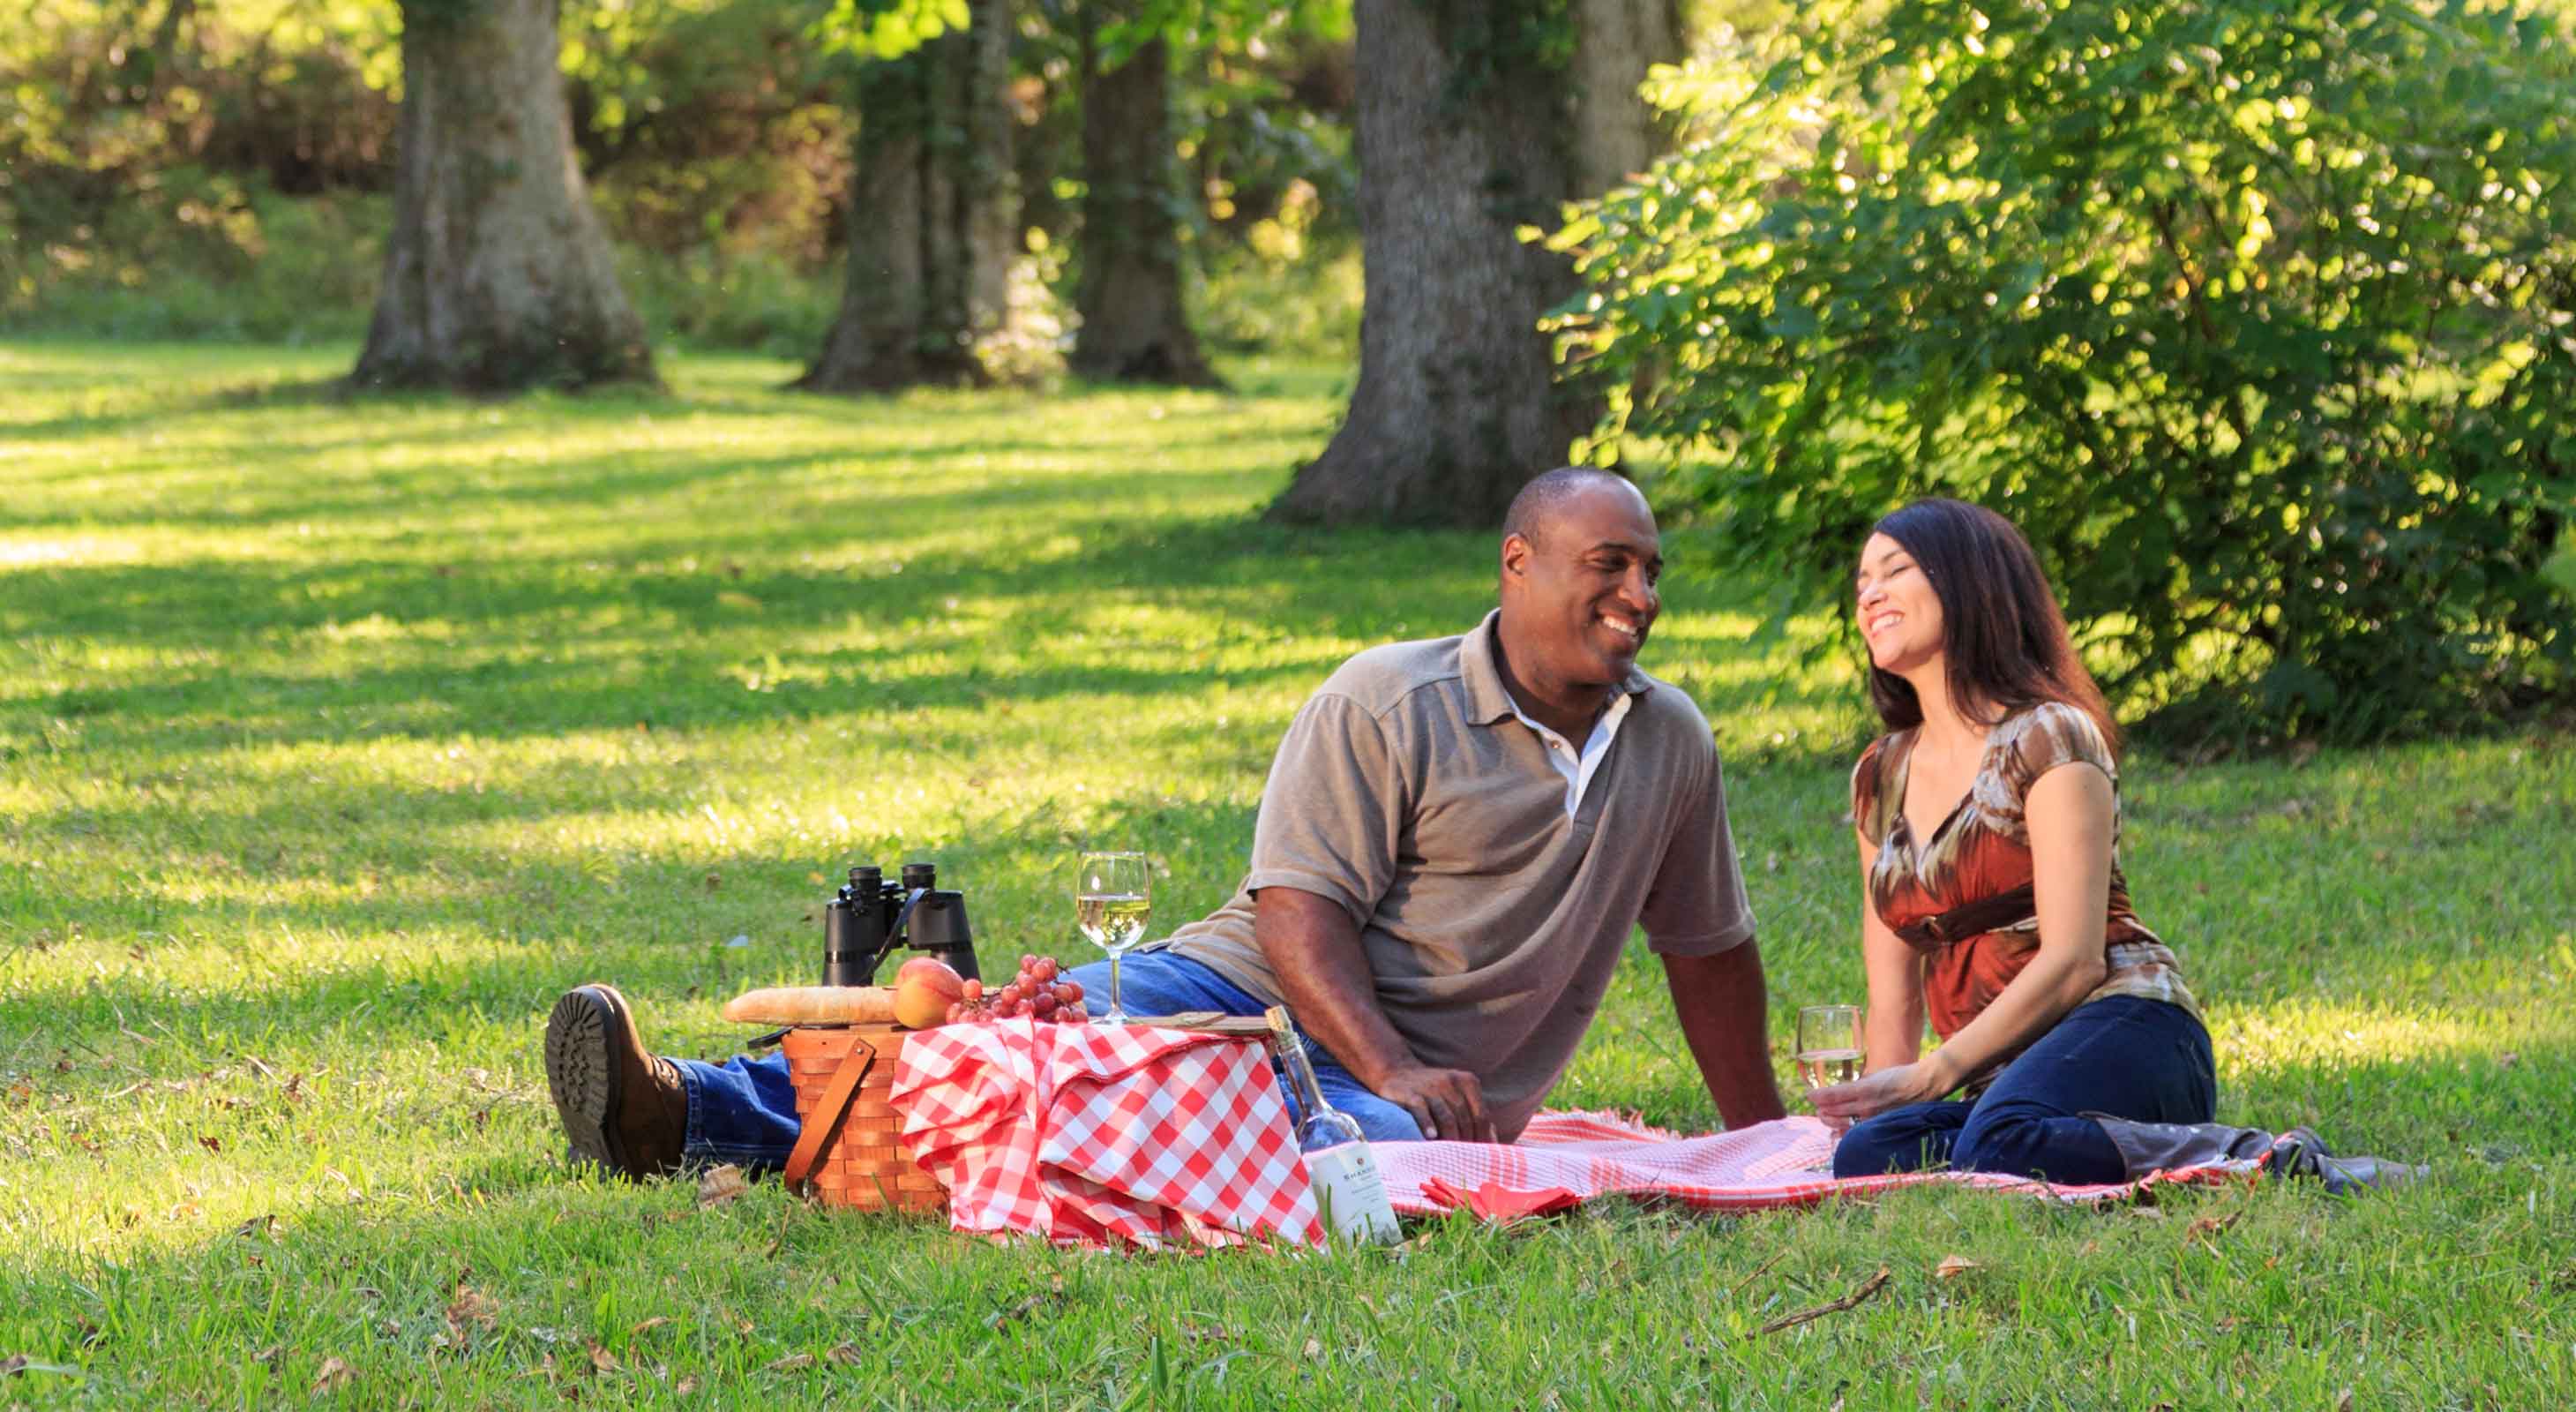 Couple having a romantic picnic lunch on the grass